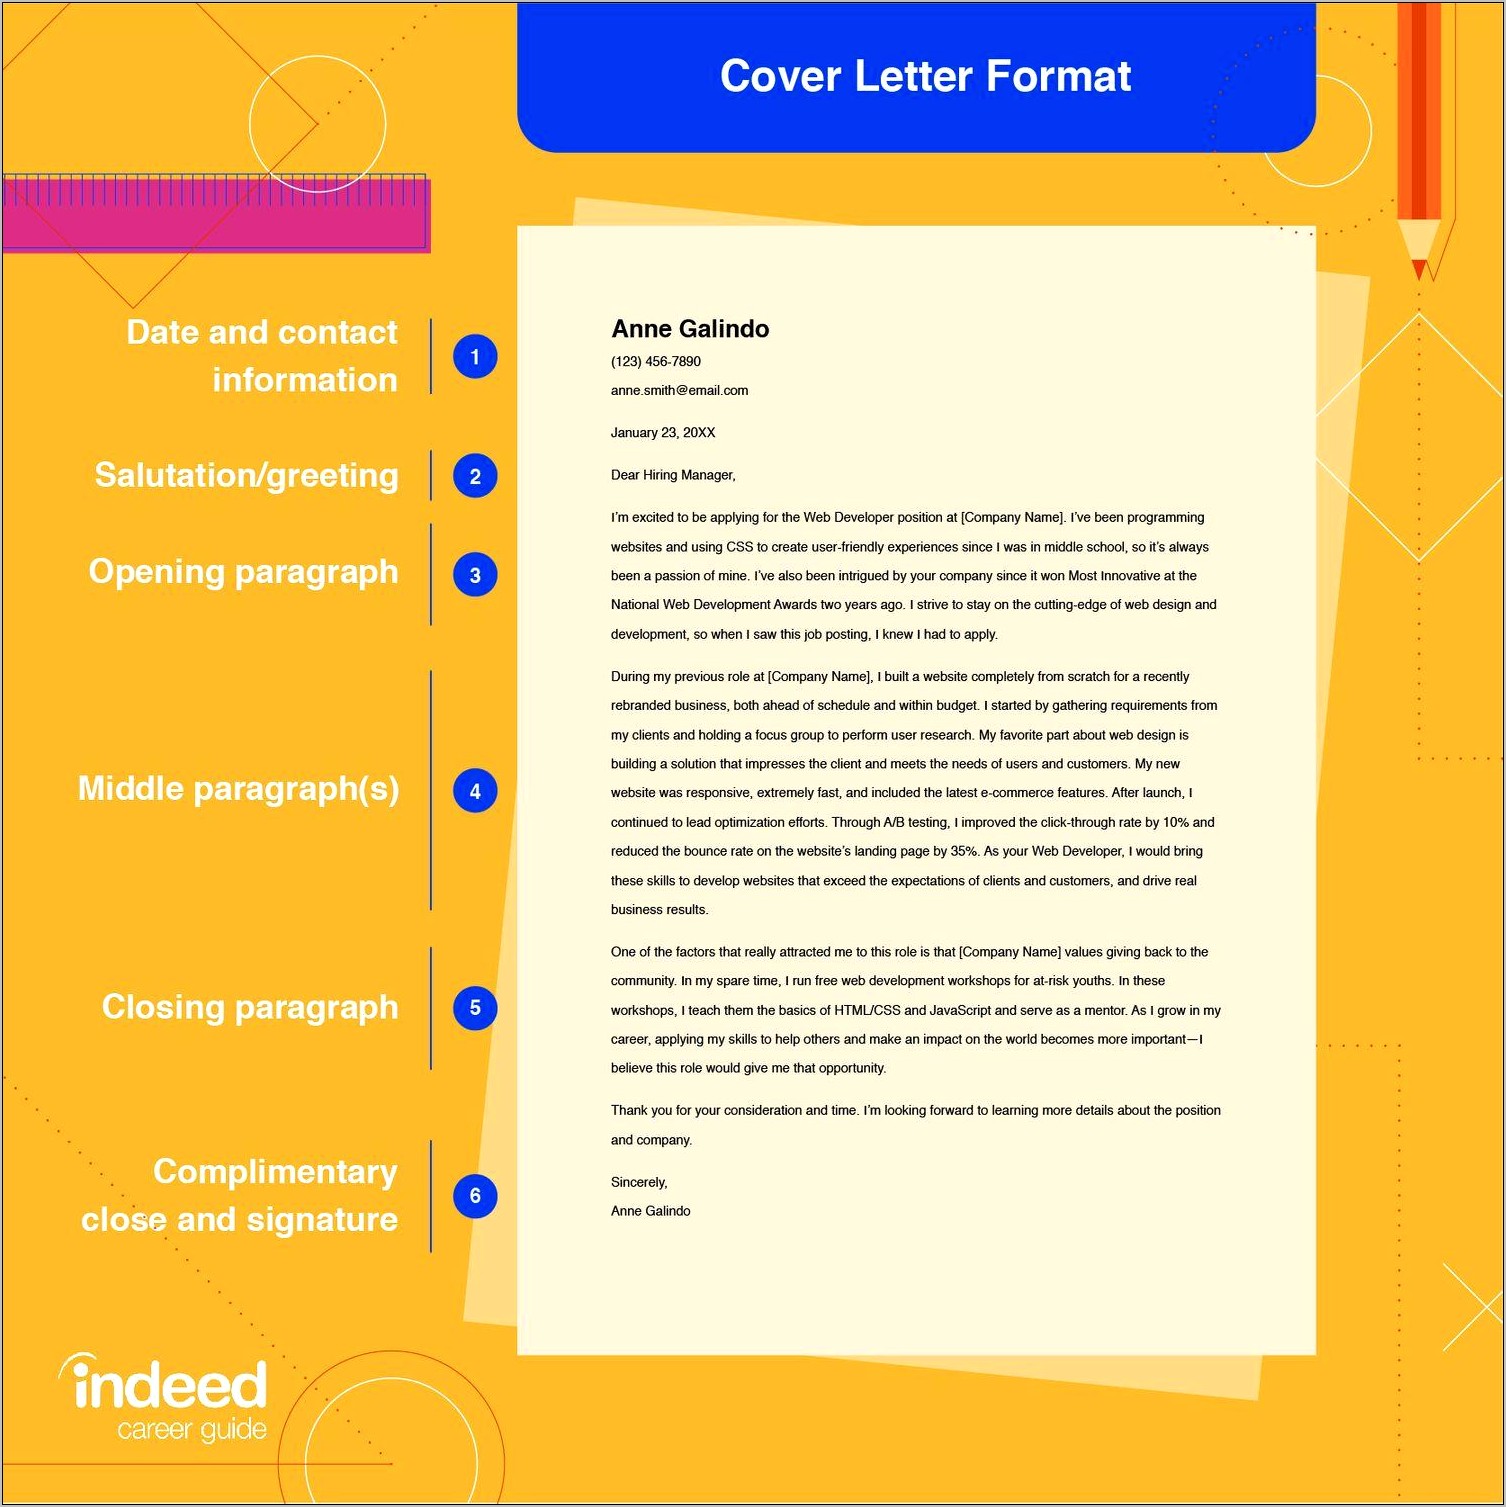 Include A Cover Letter With Your Resume